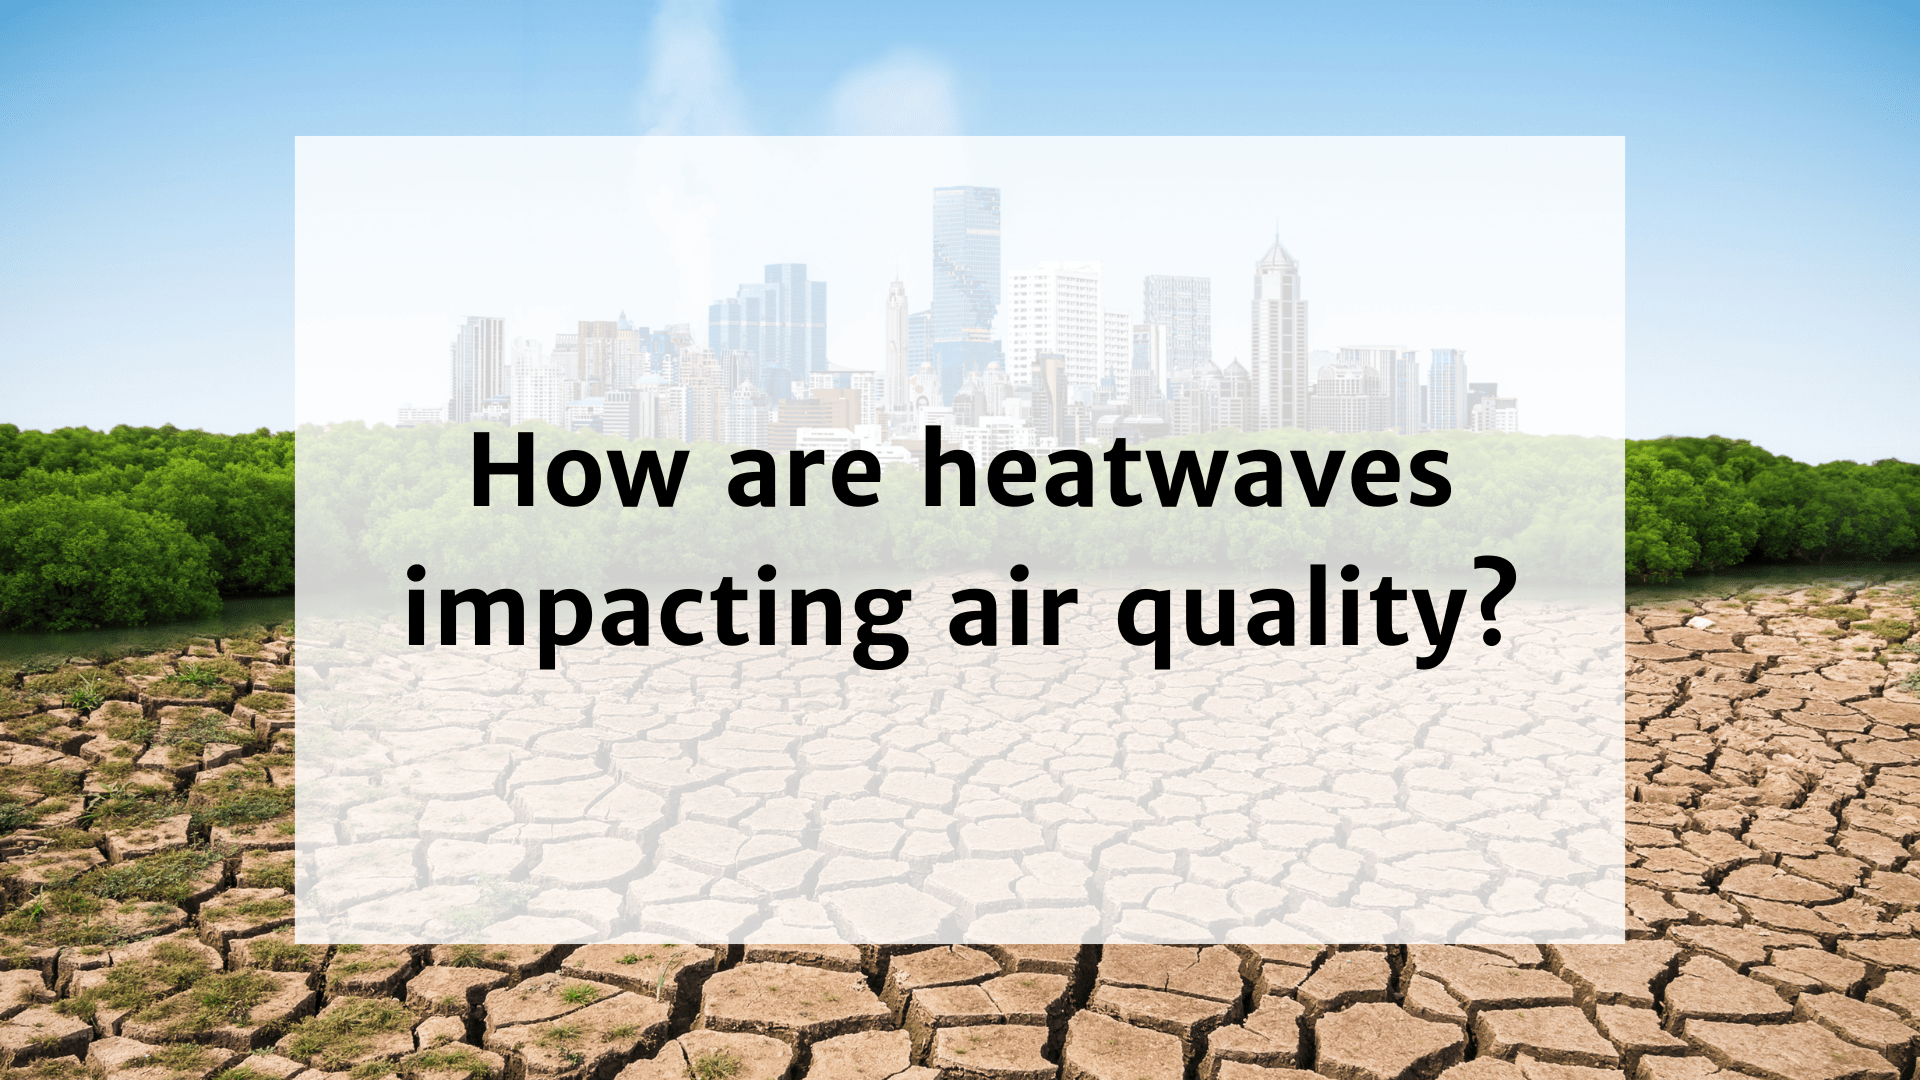 How are heatwaves impacting air quality?